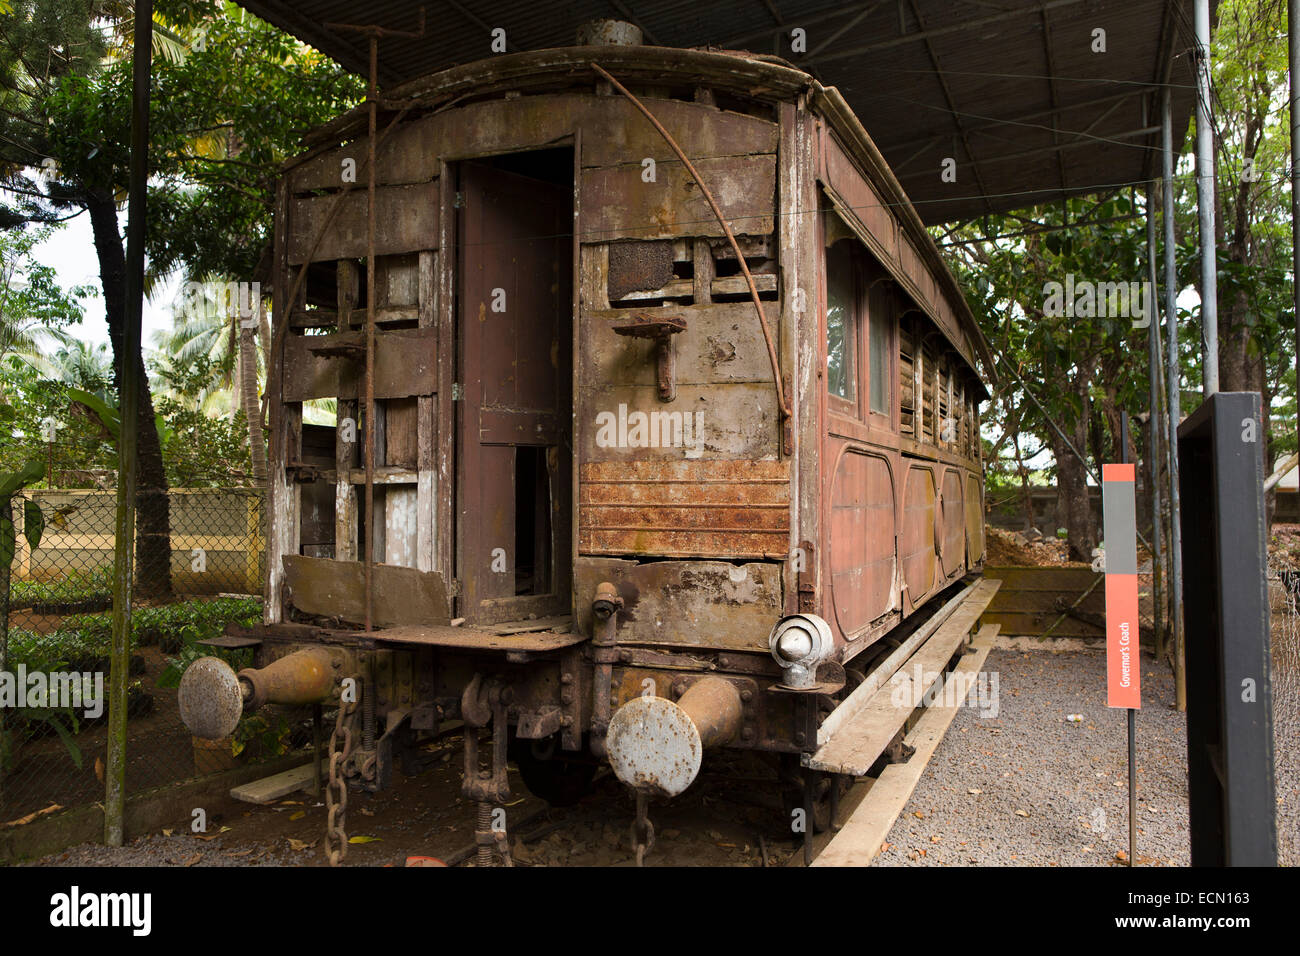 Railway Coach High Resolution Stock Photography and Images - Alamy